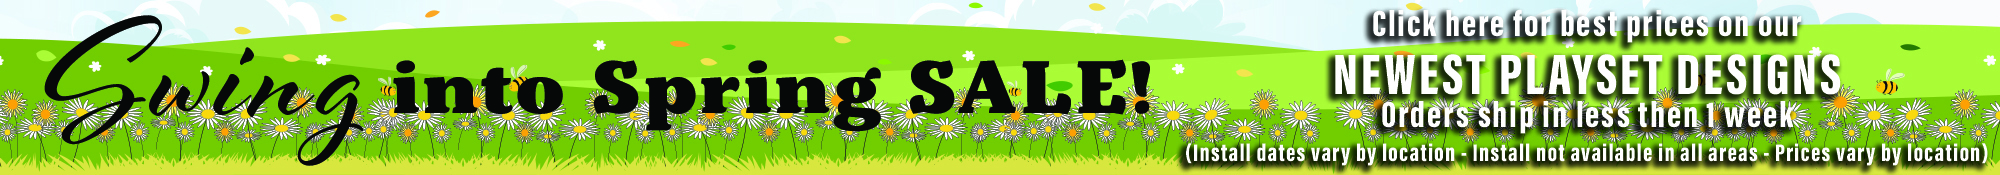 Swing_into_Spring_Sale